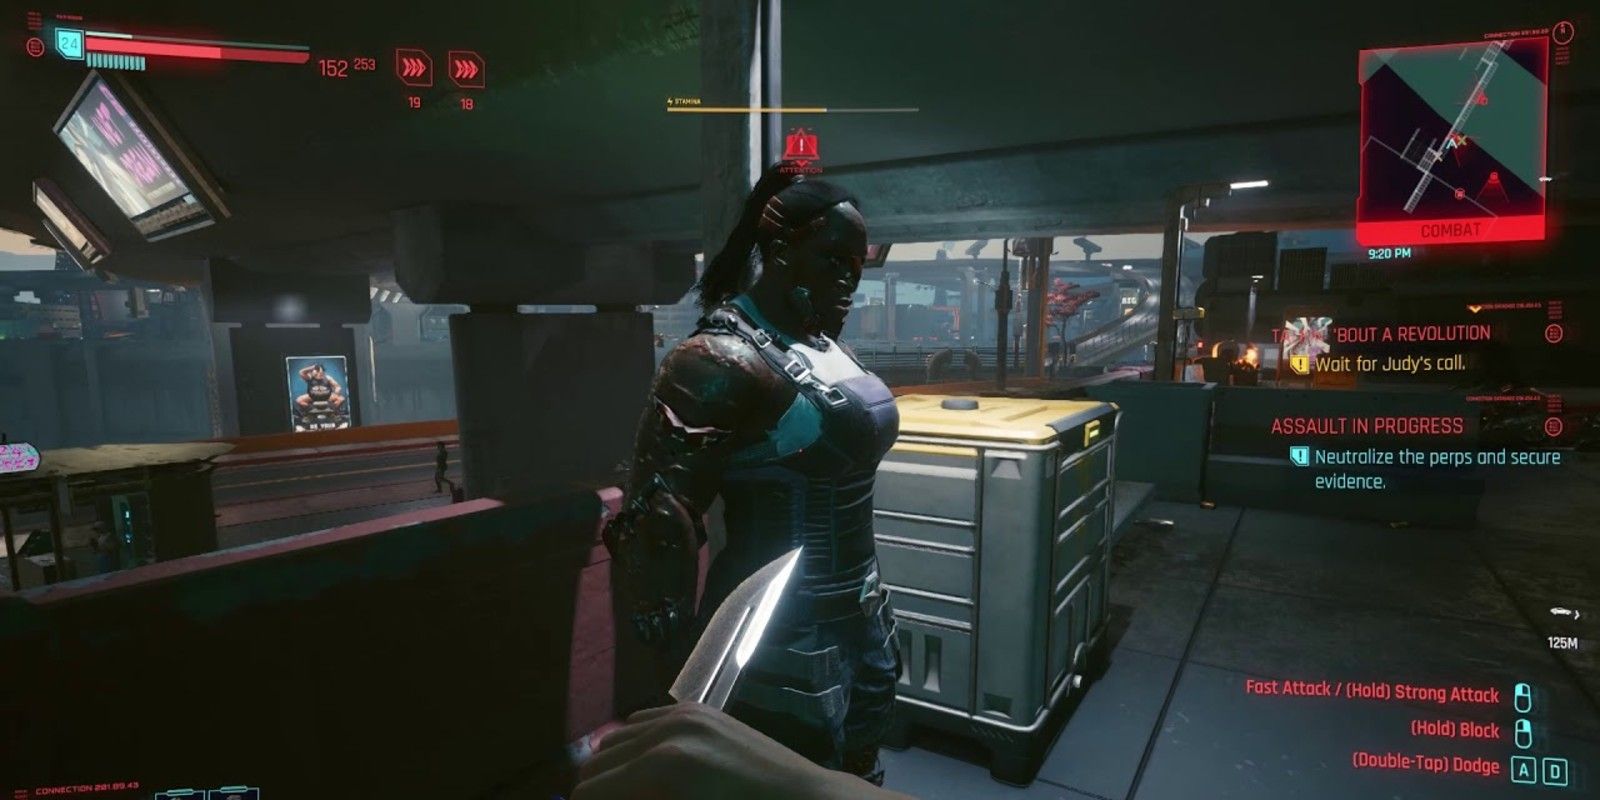 V uses a knife to 1-hit kill an enemy in Cyberpunk 2077